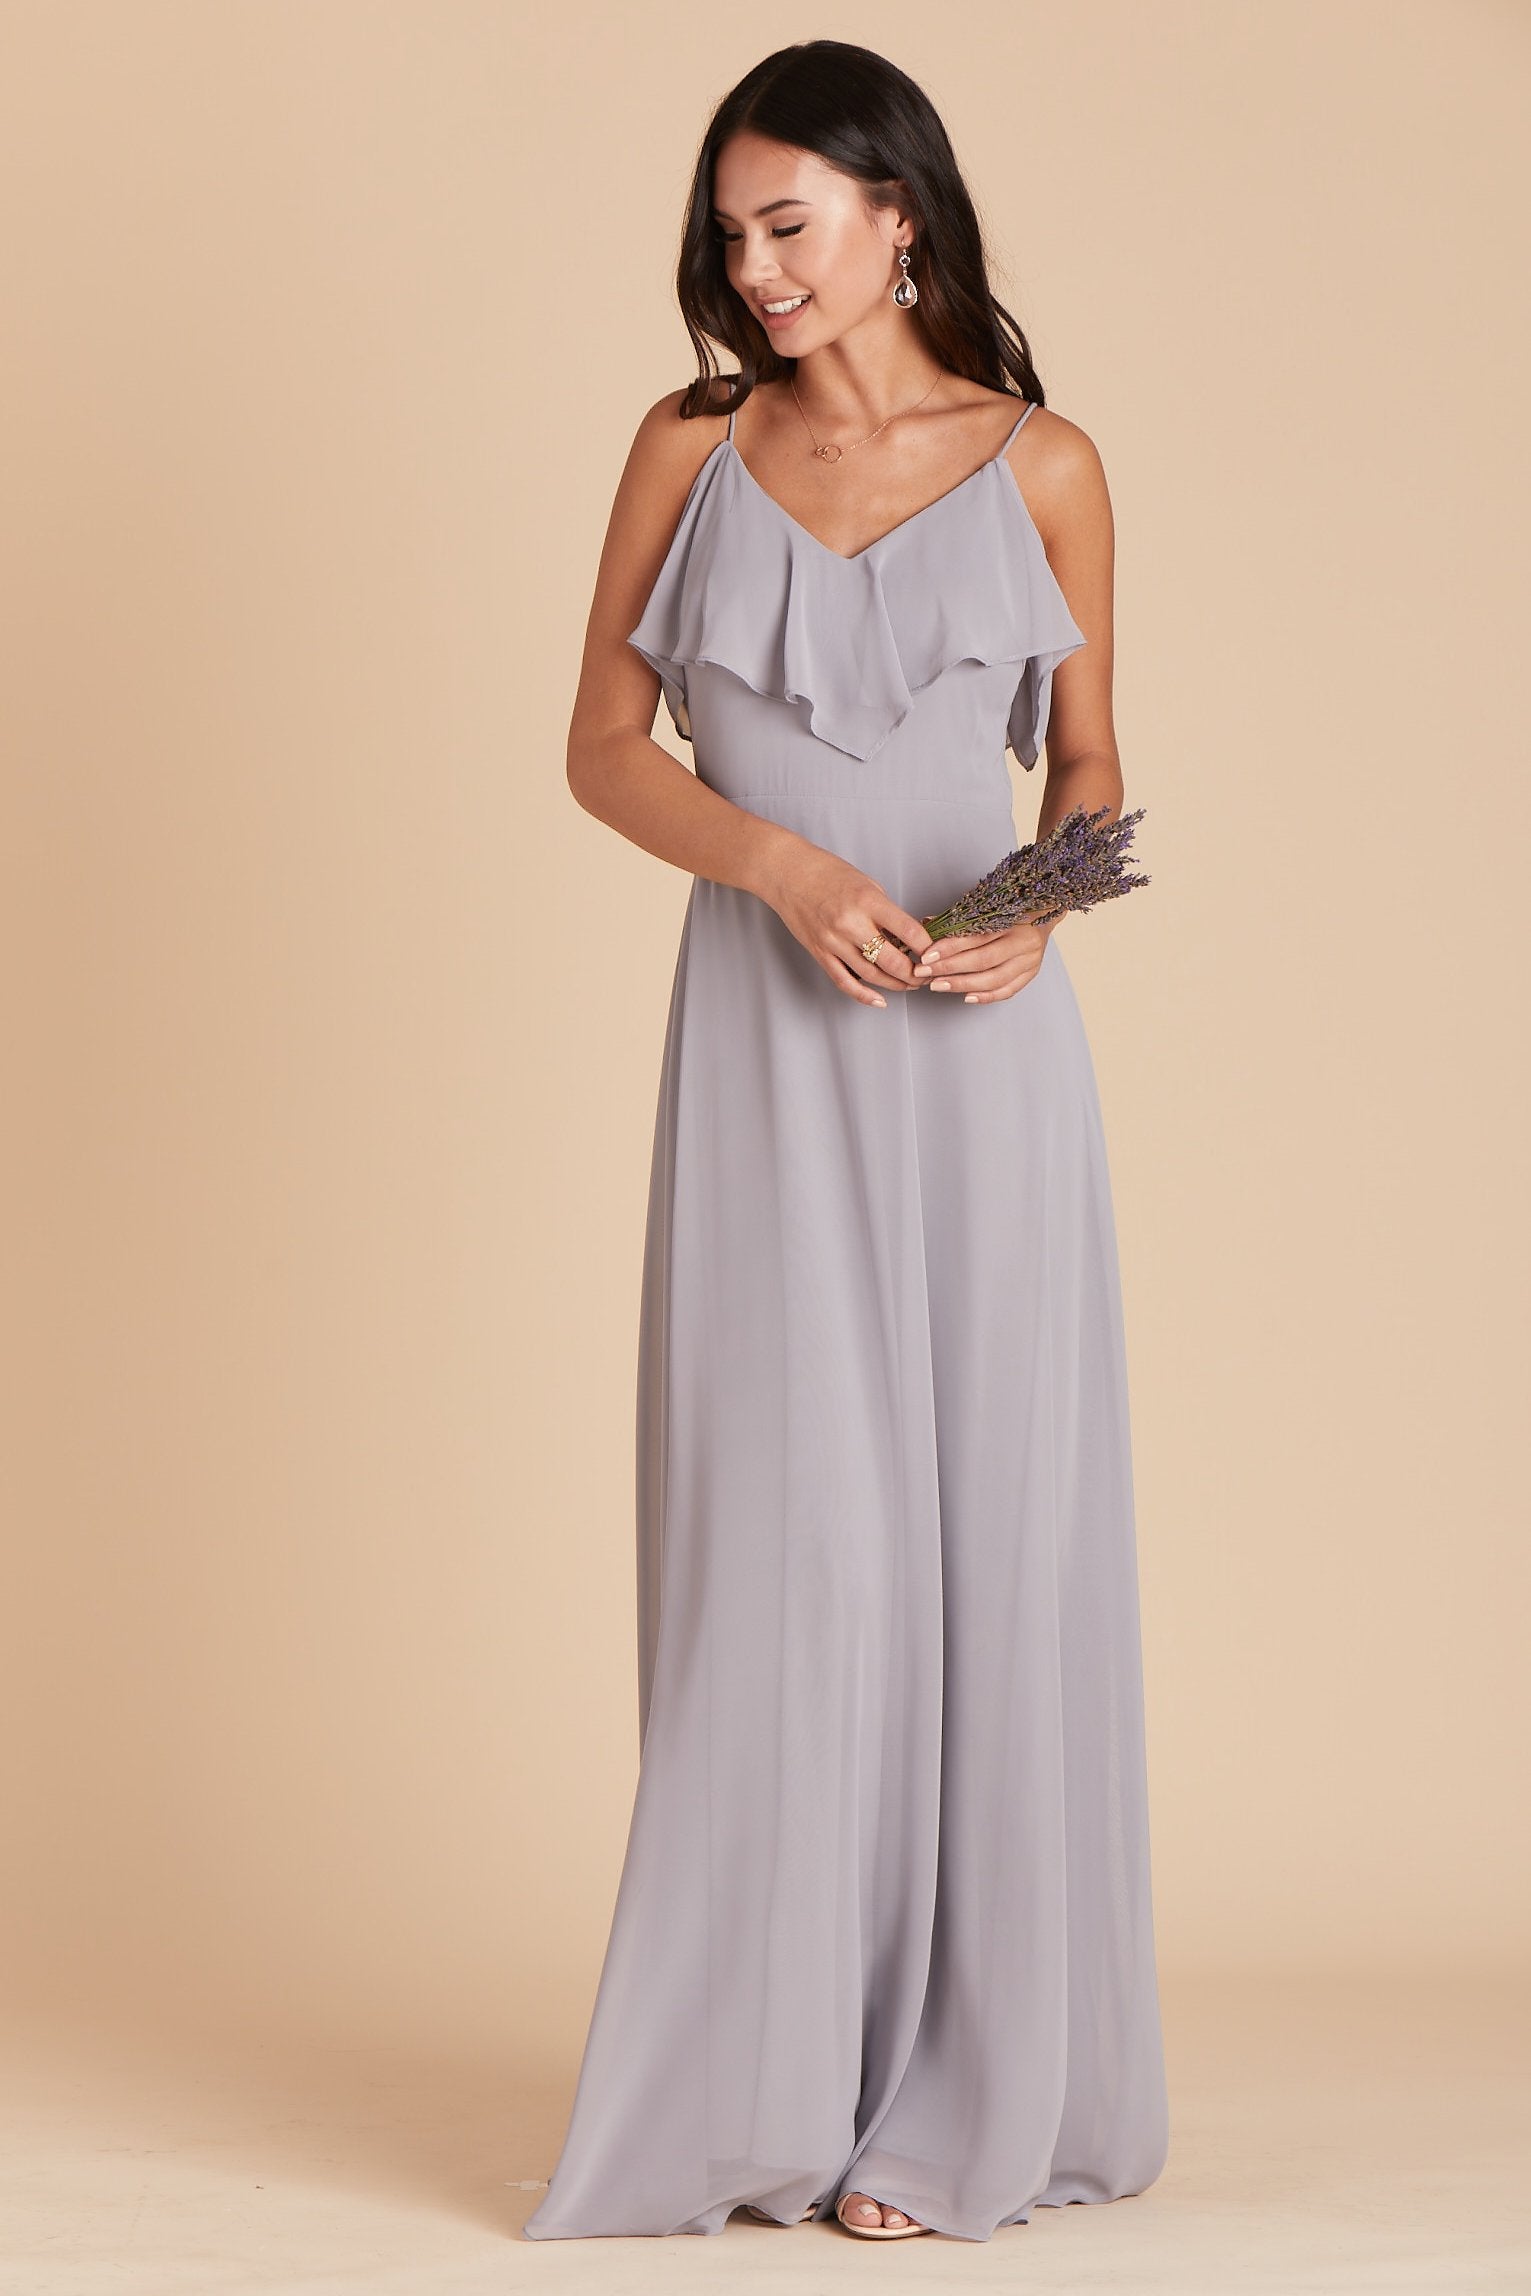 Jane convertible bridesmaid dress in silver chiffon by Birdy Grey, front view